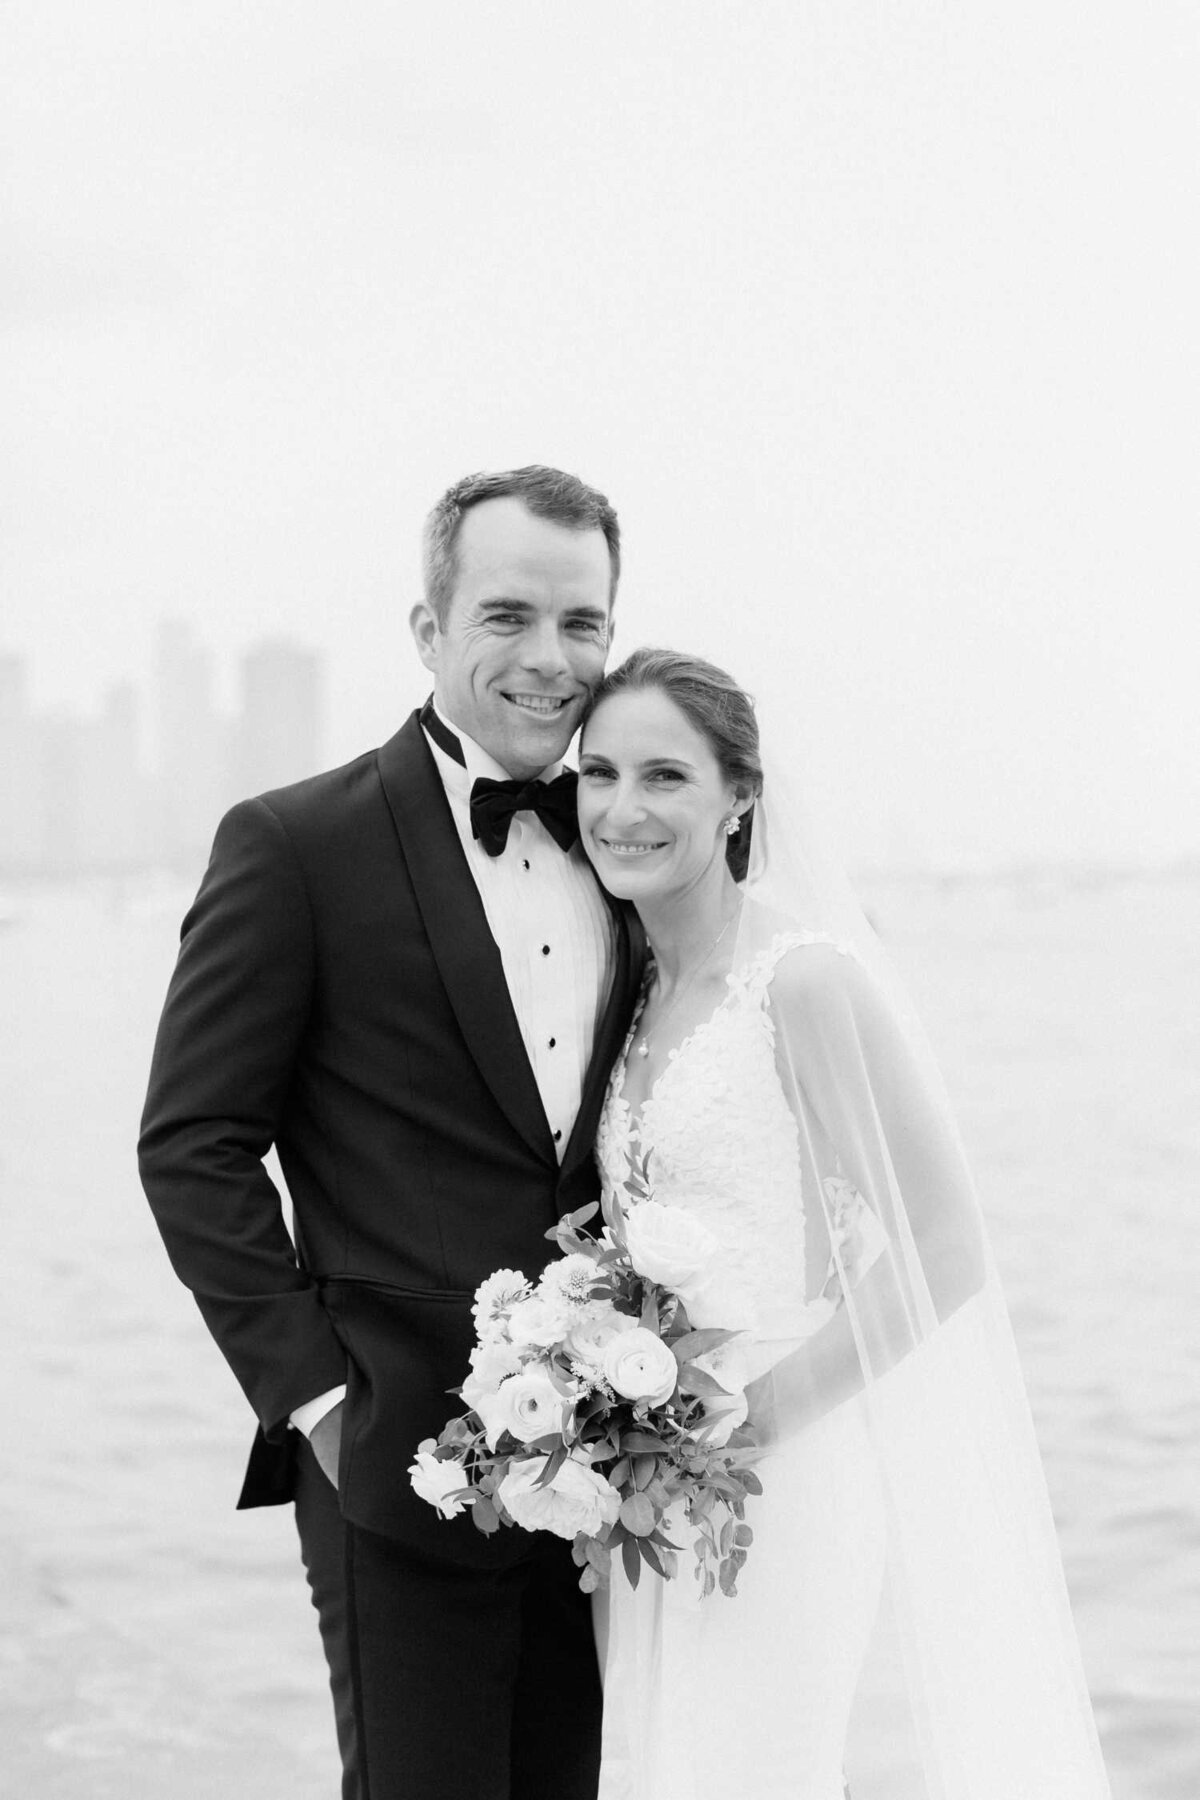 Black and white lakefront wedding day photo with bride's veil and bouquet for their Luxury Chicago Outdoor Historic Wedding Venue.